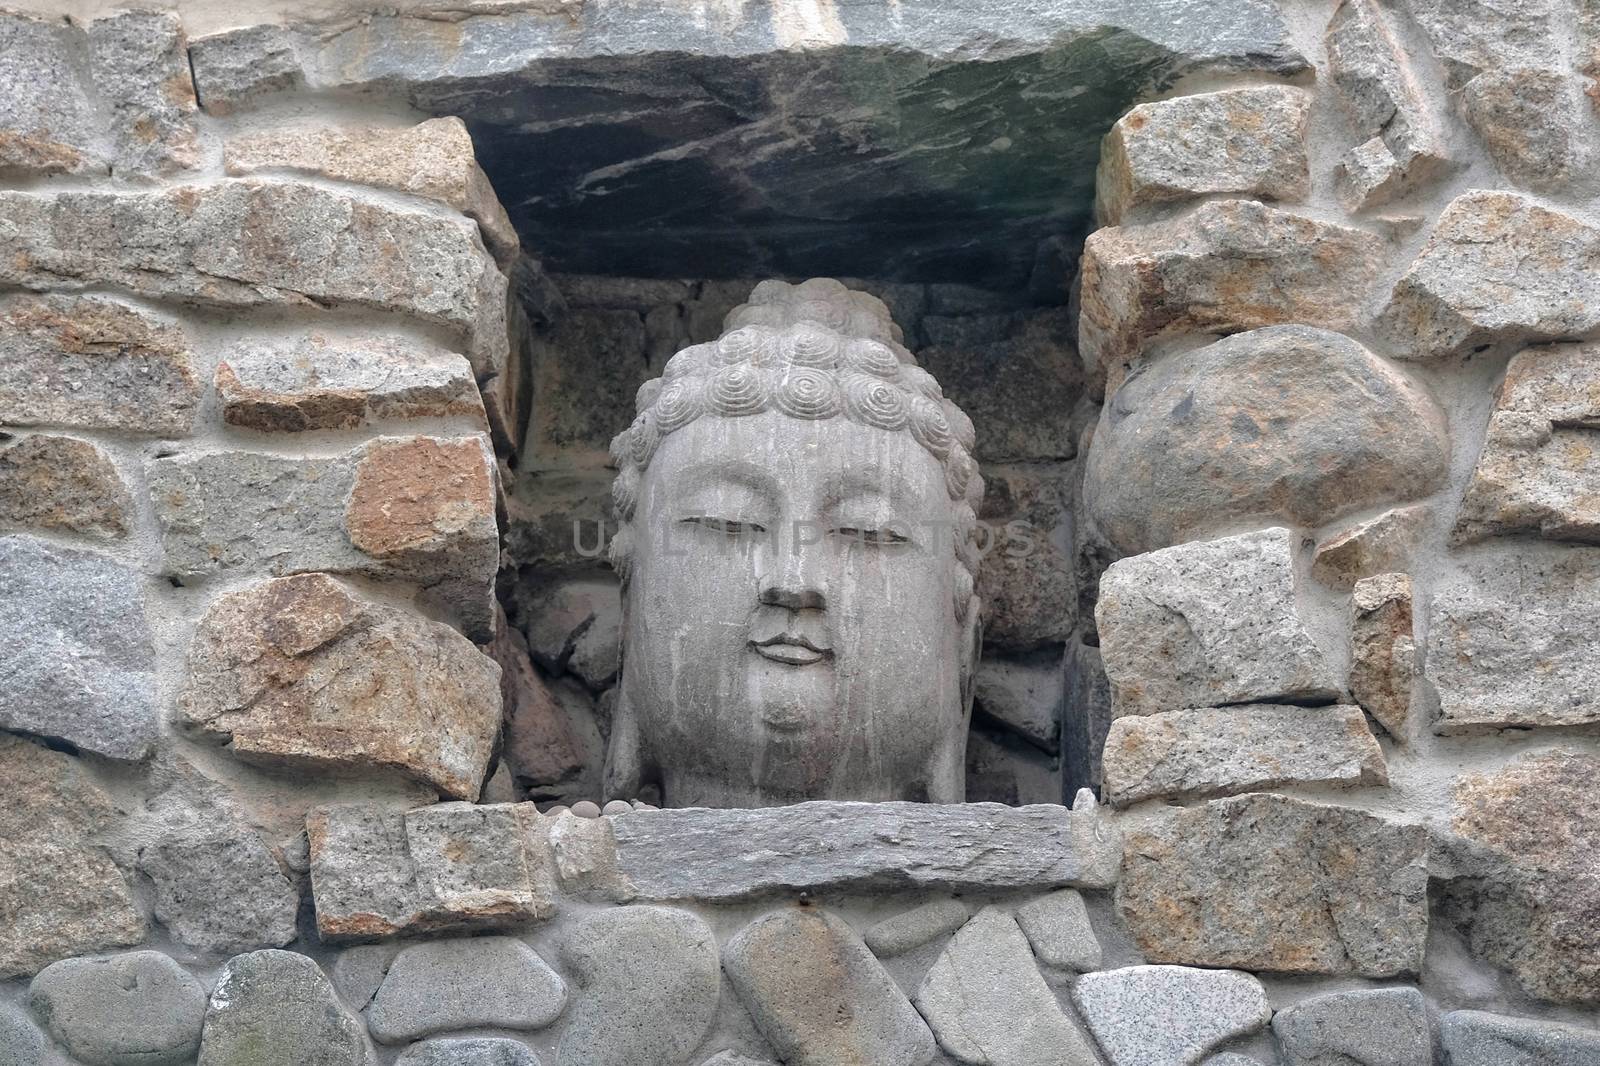 Closeup of Teh Buddha Head stone statue at entrance gate in Haed by Surasak